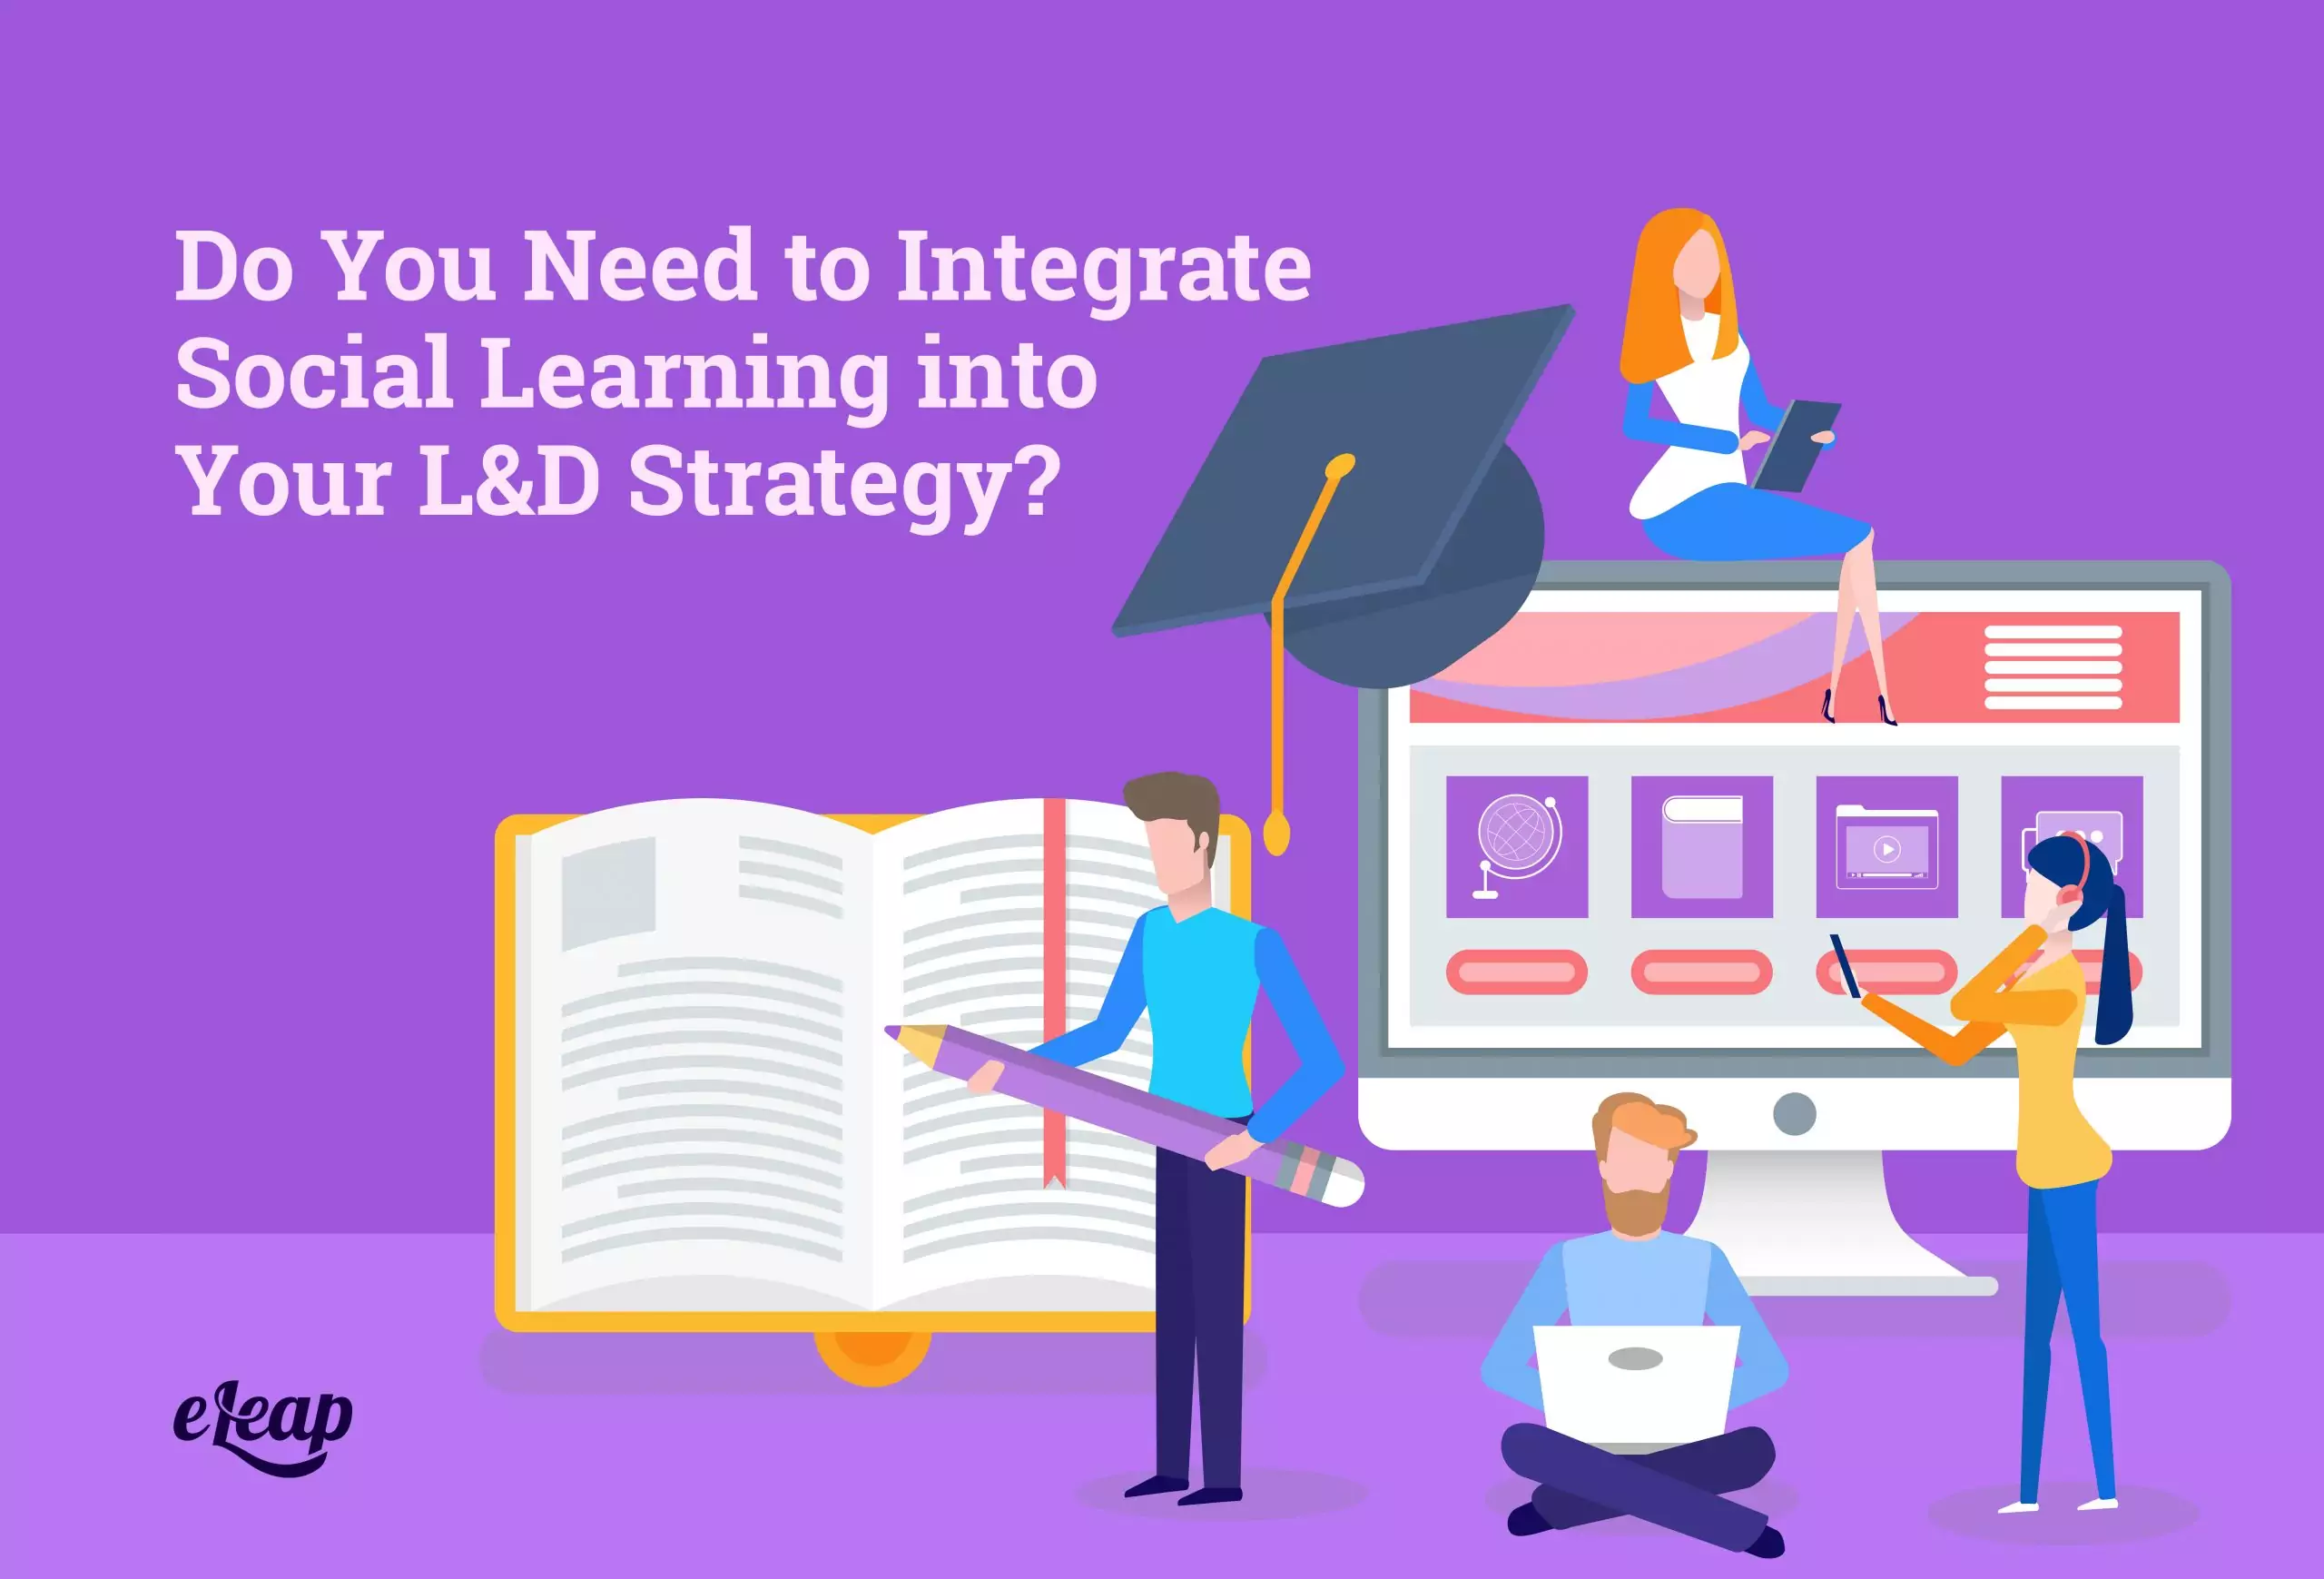 Do You Need to Integrate Social Learning into Your L&D Strategy?